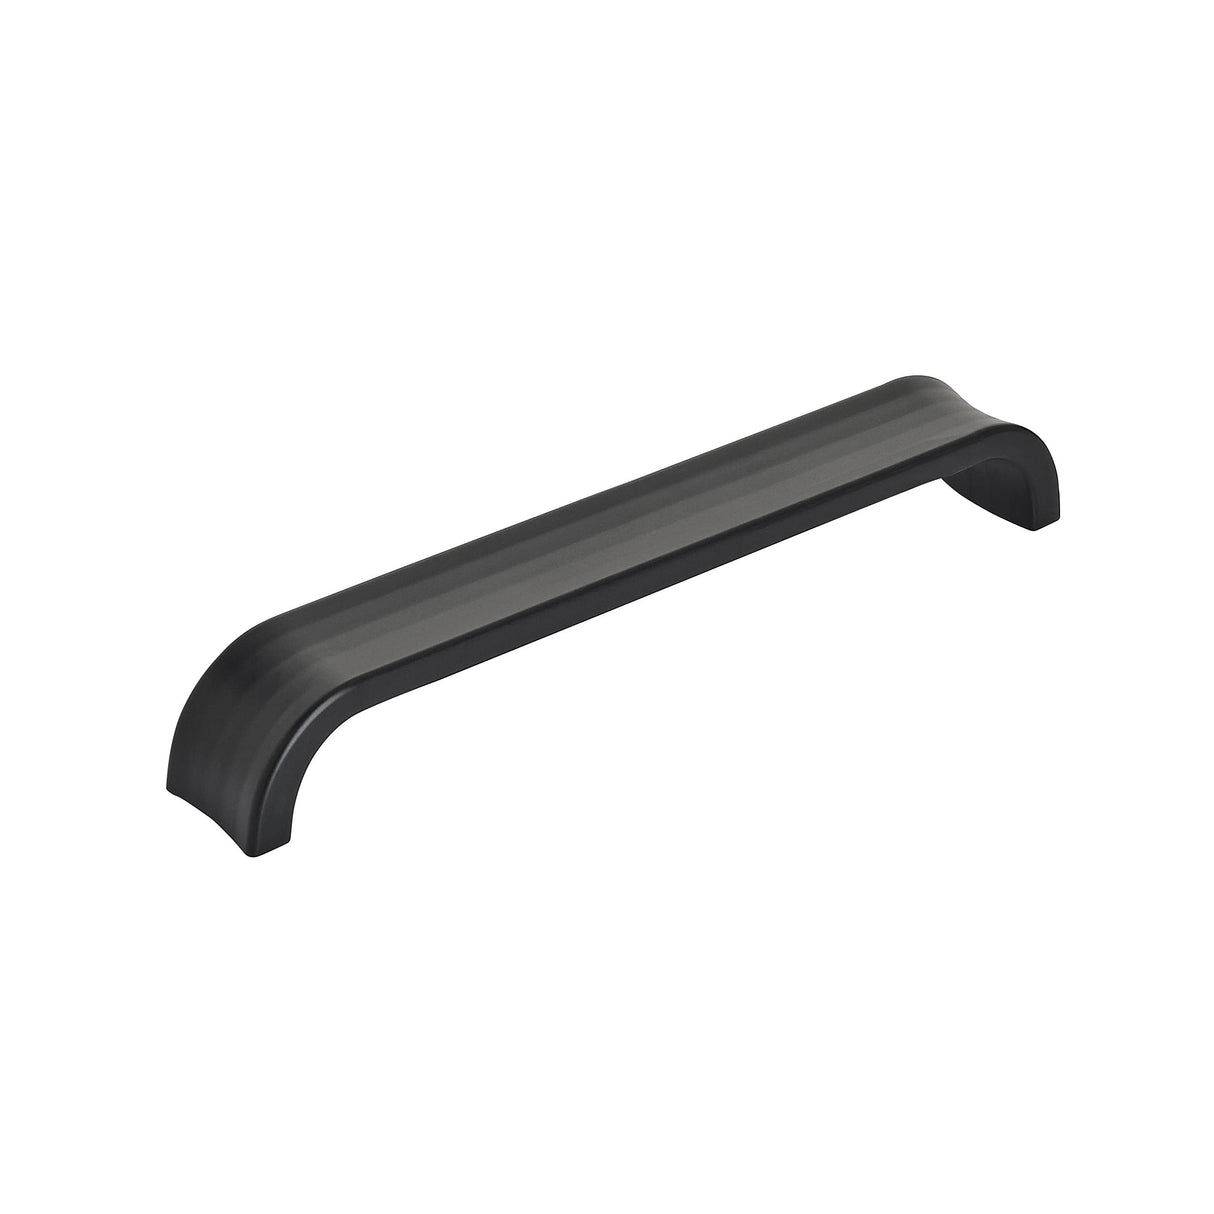 Amerock Cabinet Pull Matte Black 6-5/16 inch (160 mm) Center to Center Concentric 1 Pack Drawer Pull Drawer Handle Cabinet Hardware